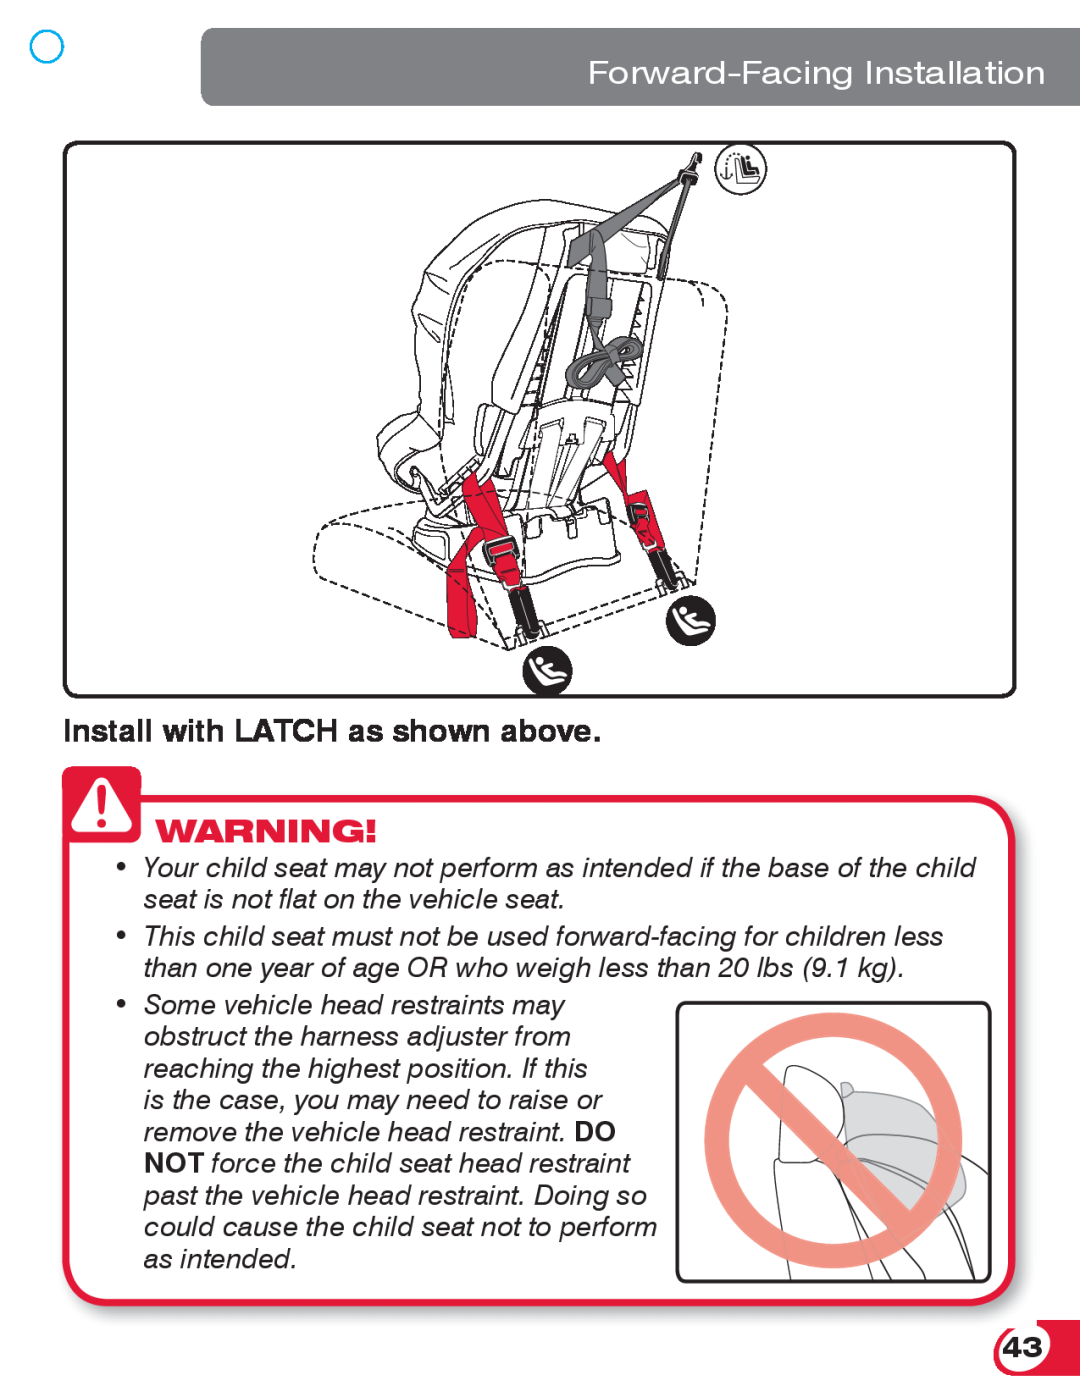 Britax 70 CS manual Forward-Facing Installation, Install with LATCH as shown above 